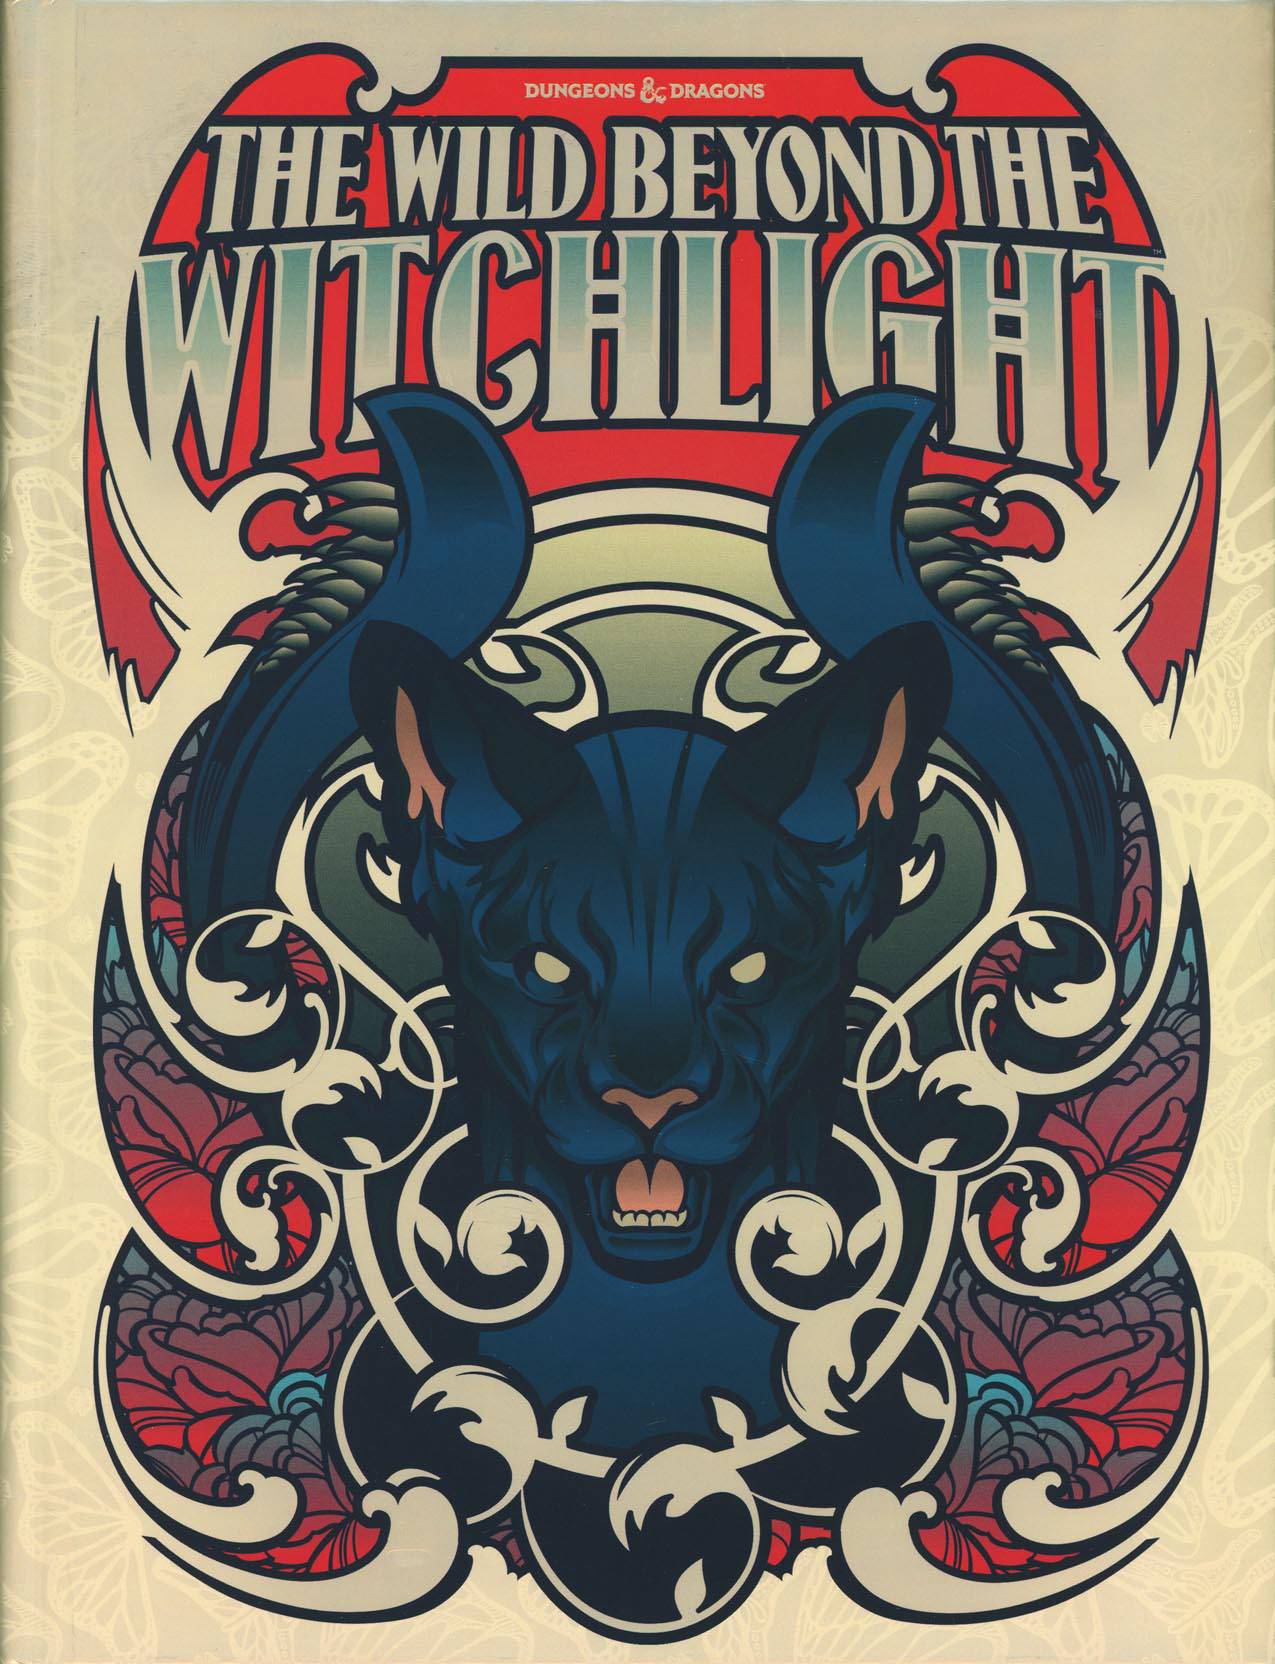 DUNGEONS & DRAGONS - THE WILD BEYOND THE WITCHLIGHT - LIMITED EDITION ALT COVER - C9277 - RPG RELIQUARY